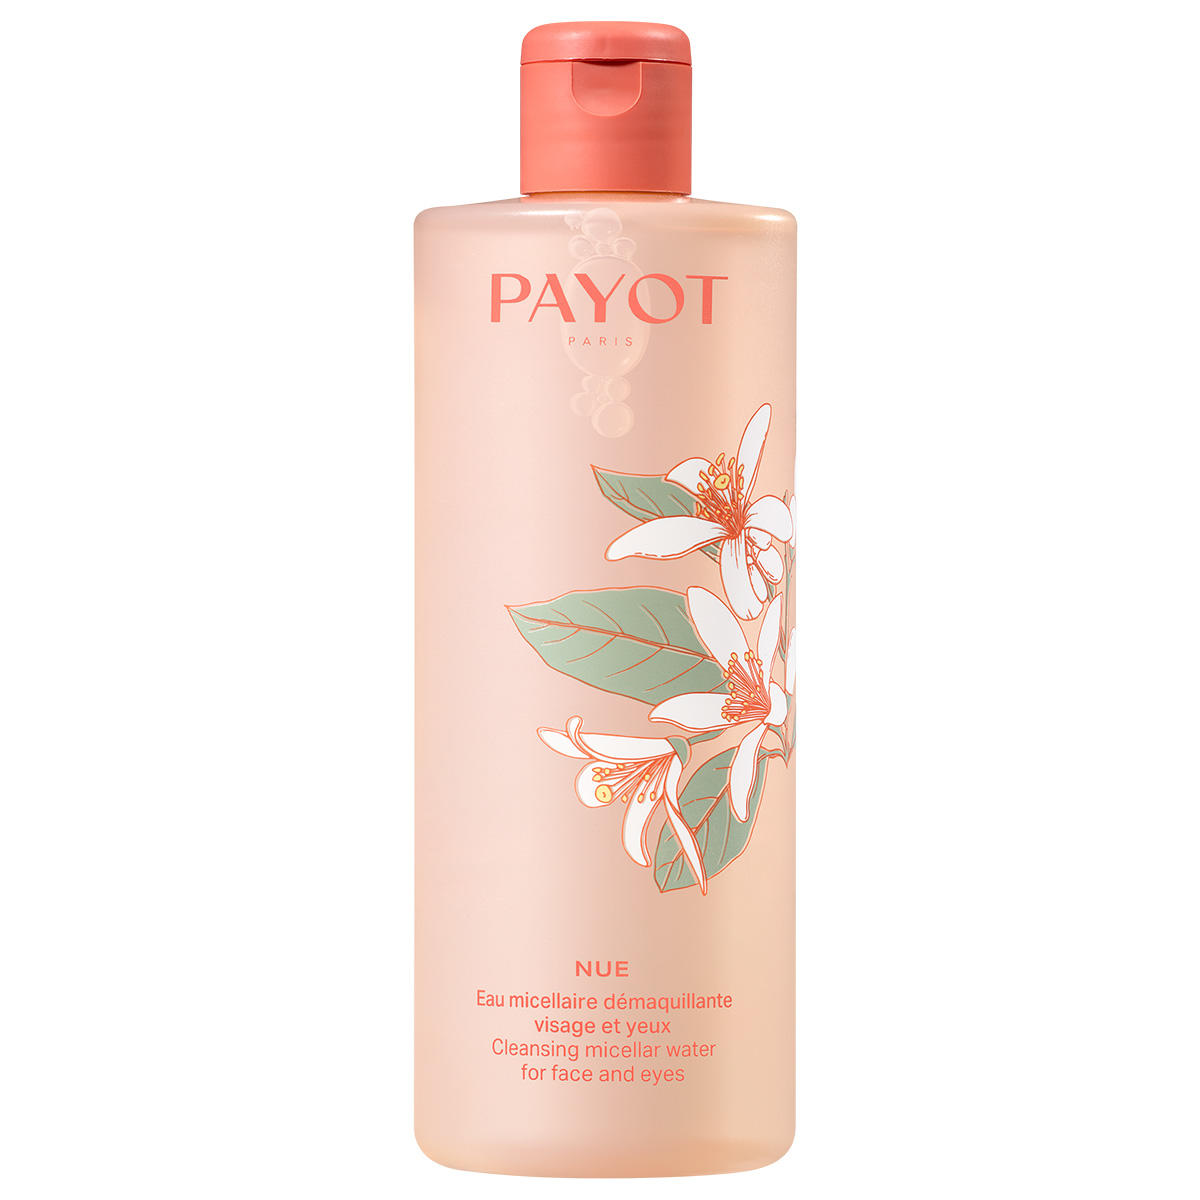 Payot Nue Eau Micellaire Démaquillante - Limited Edtion 400 ml